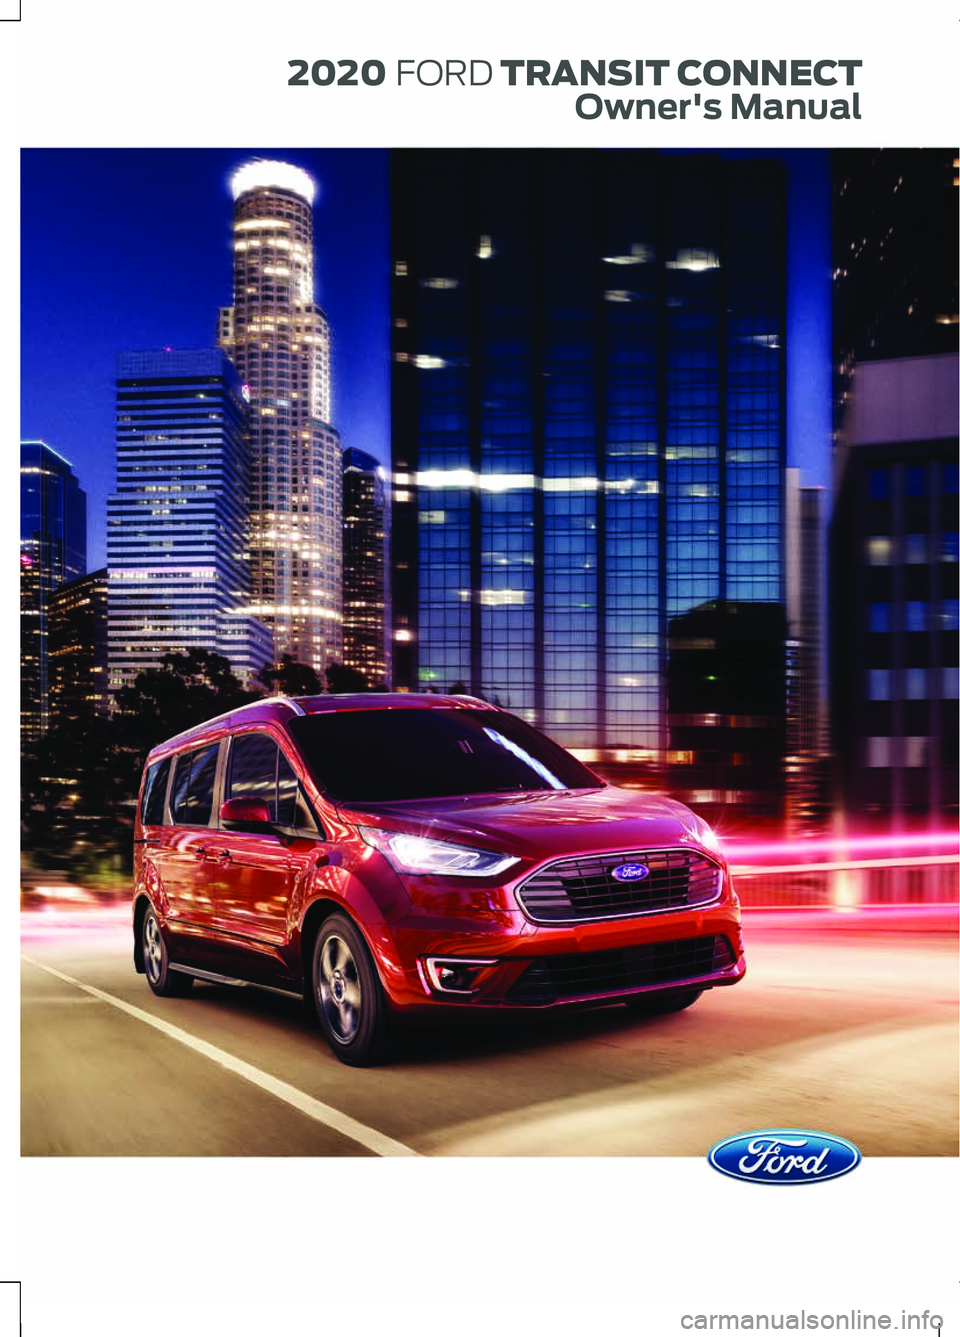 FORD TRANSIT CONNECT 2020  Owners Manual  2020
 FORD TRANSIT CONNECT
Owner's Manual 